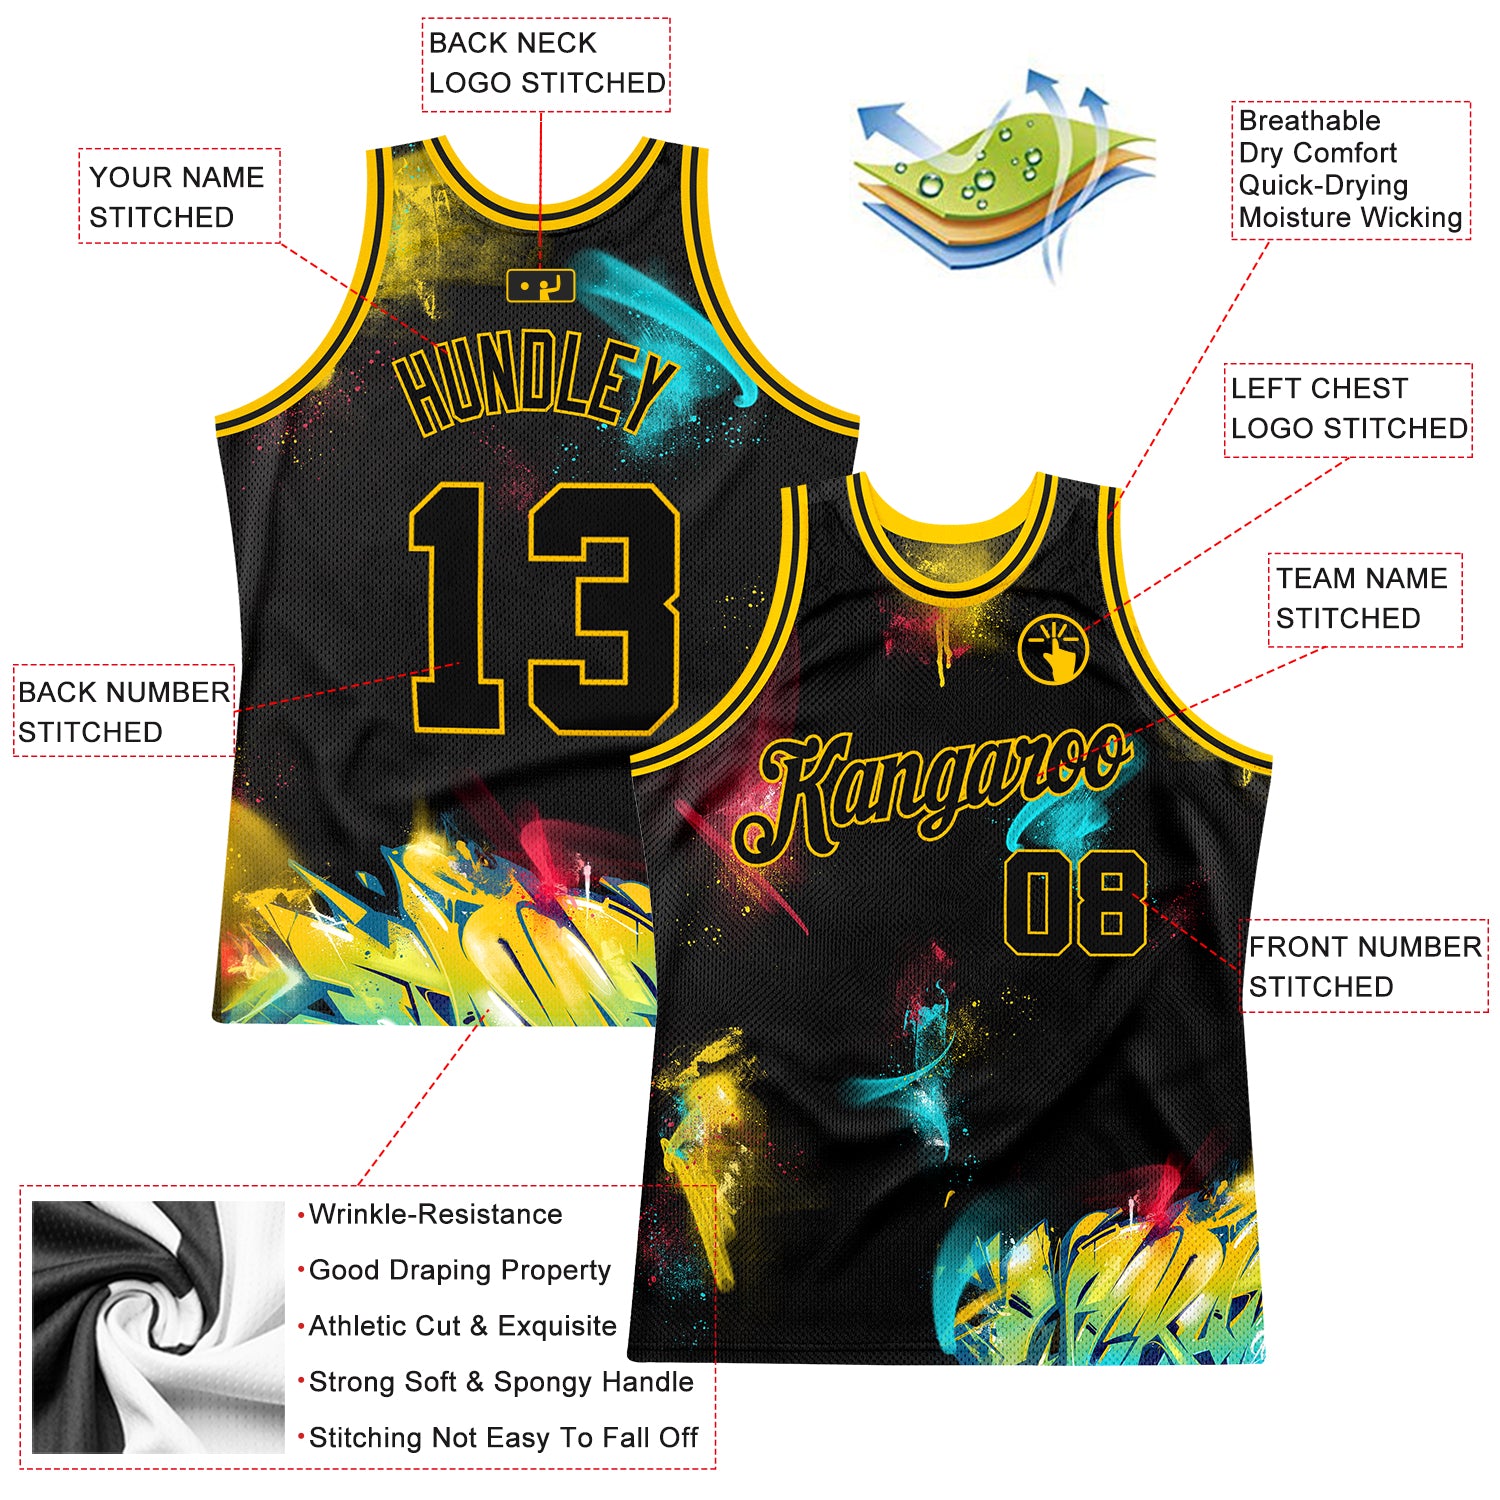 black and gold sublimation jersey